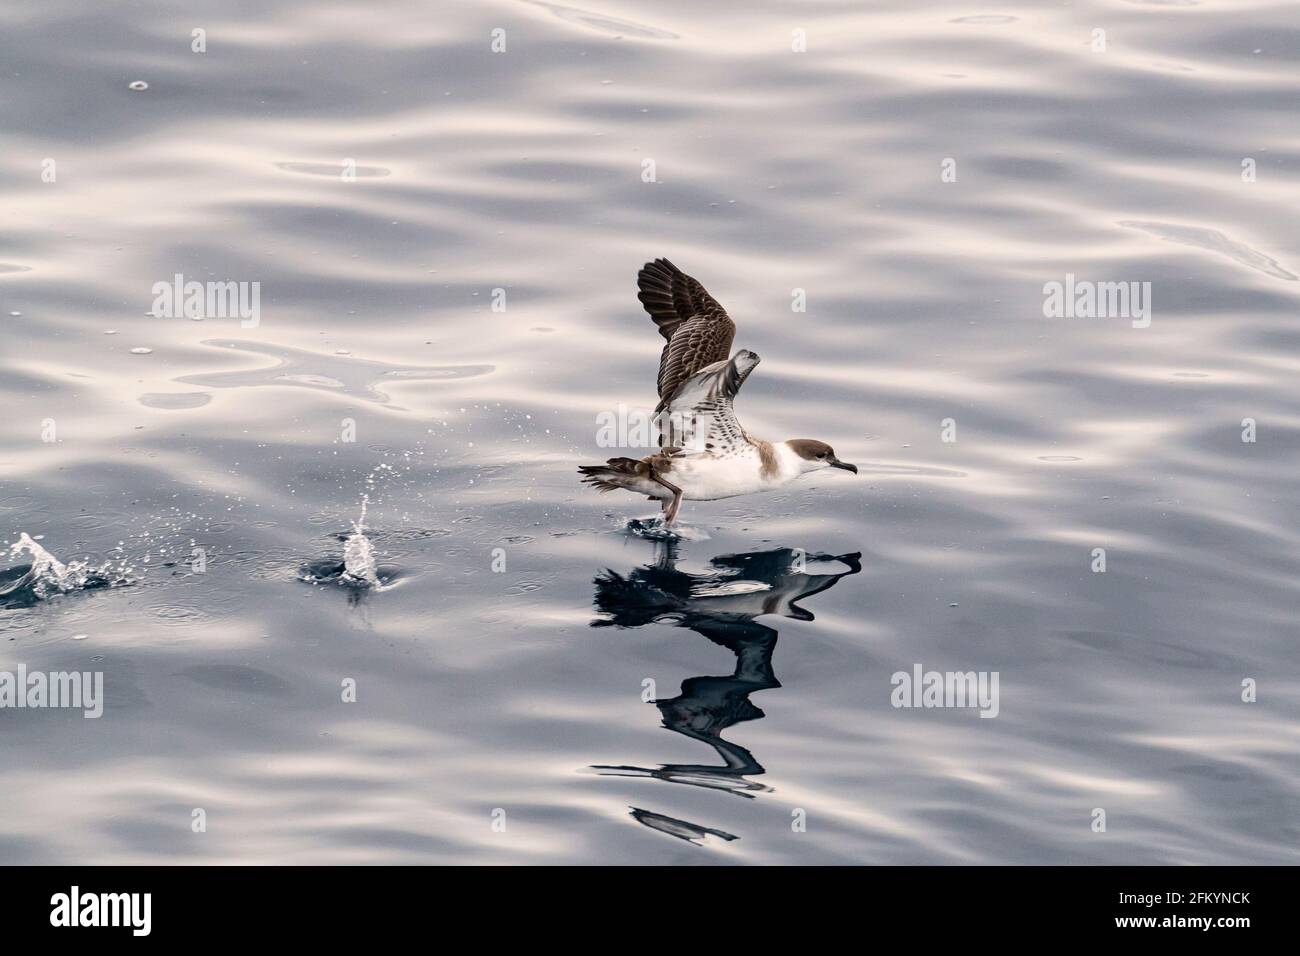 Great shearwater, Ardenna gravis, taking flight from a calm sea along the eastern coast of Greenland. Stock Photo